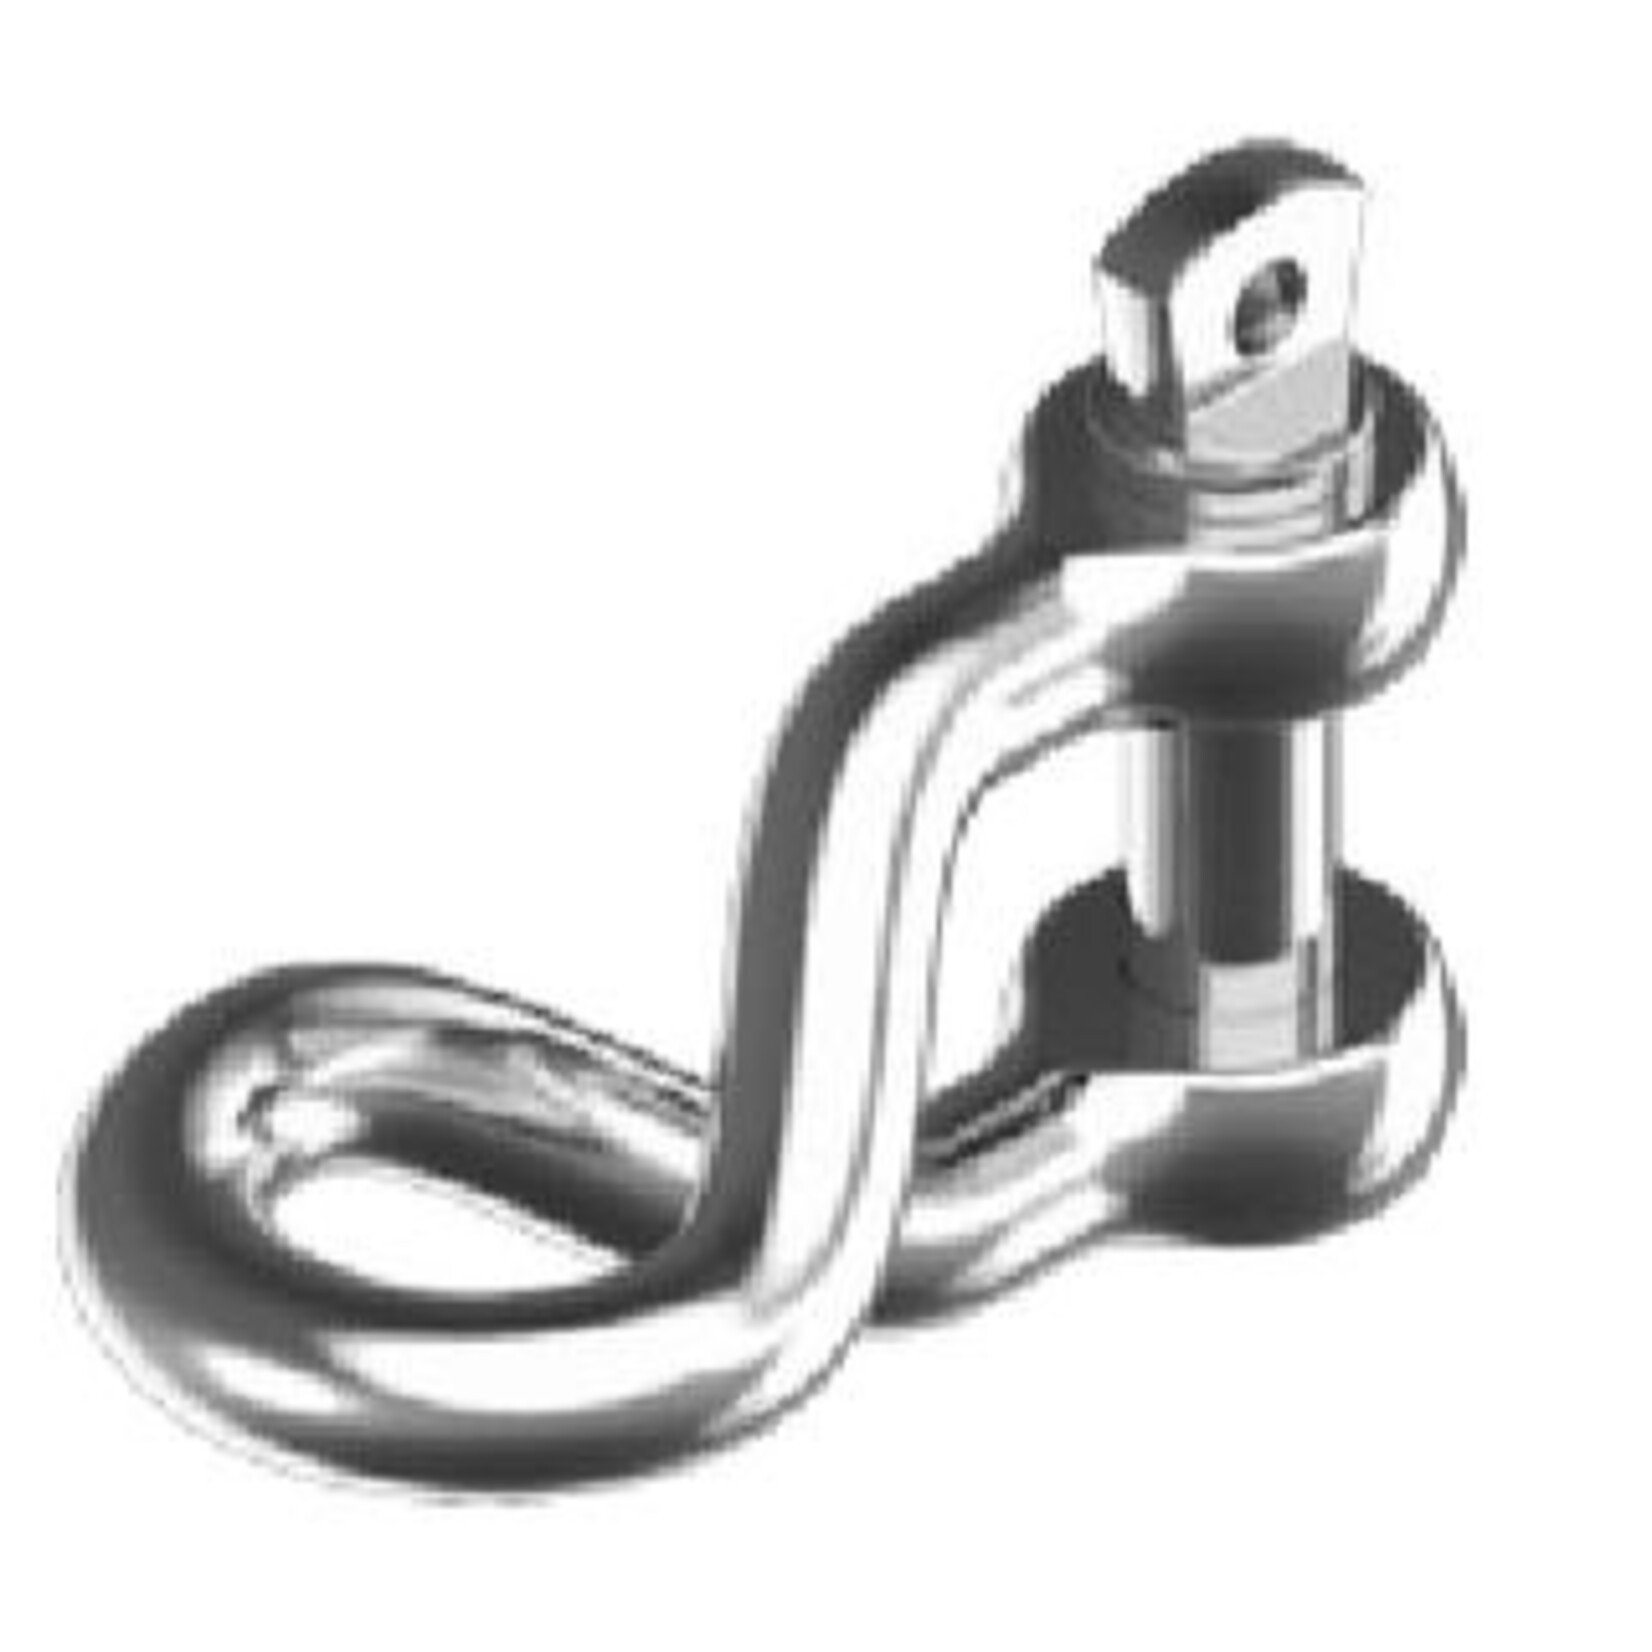 Stainless twisted shackle 6mm 10 pcs